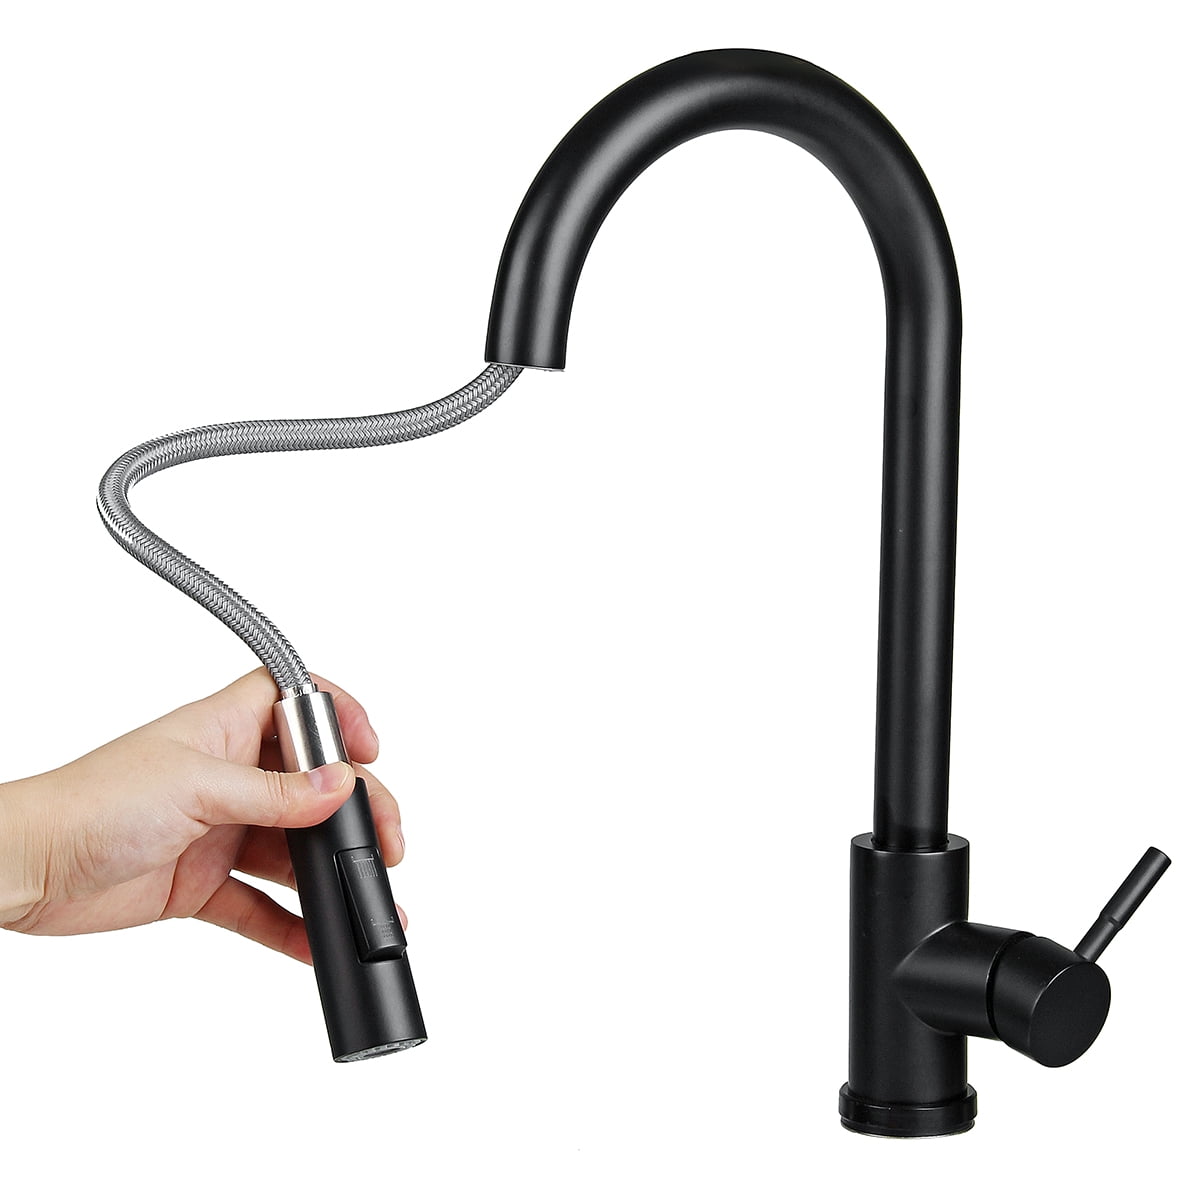 Chrome Finish Voolan Kitchen Faucet with Pull Down Sprayer, Dual Water Functions Lift Type Kitchen Sink Faucets with Deck Plate Single Handle